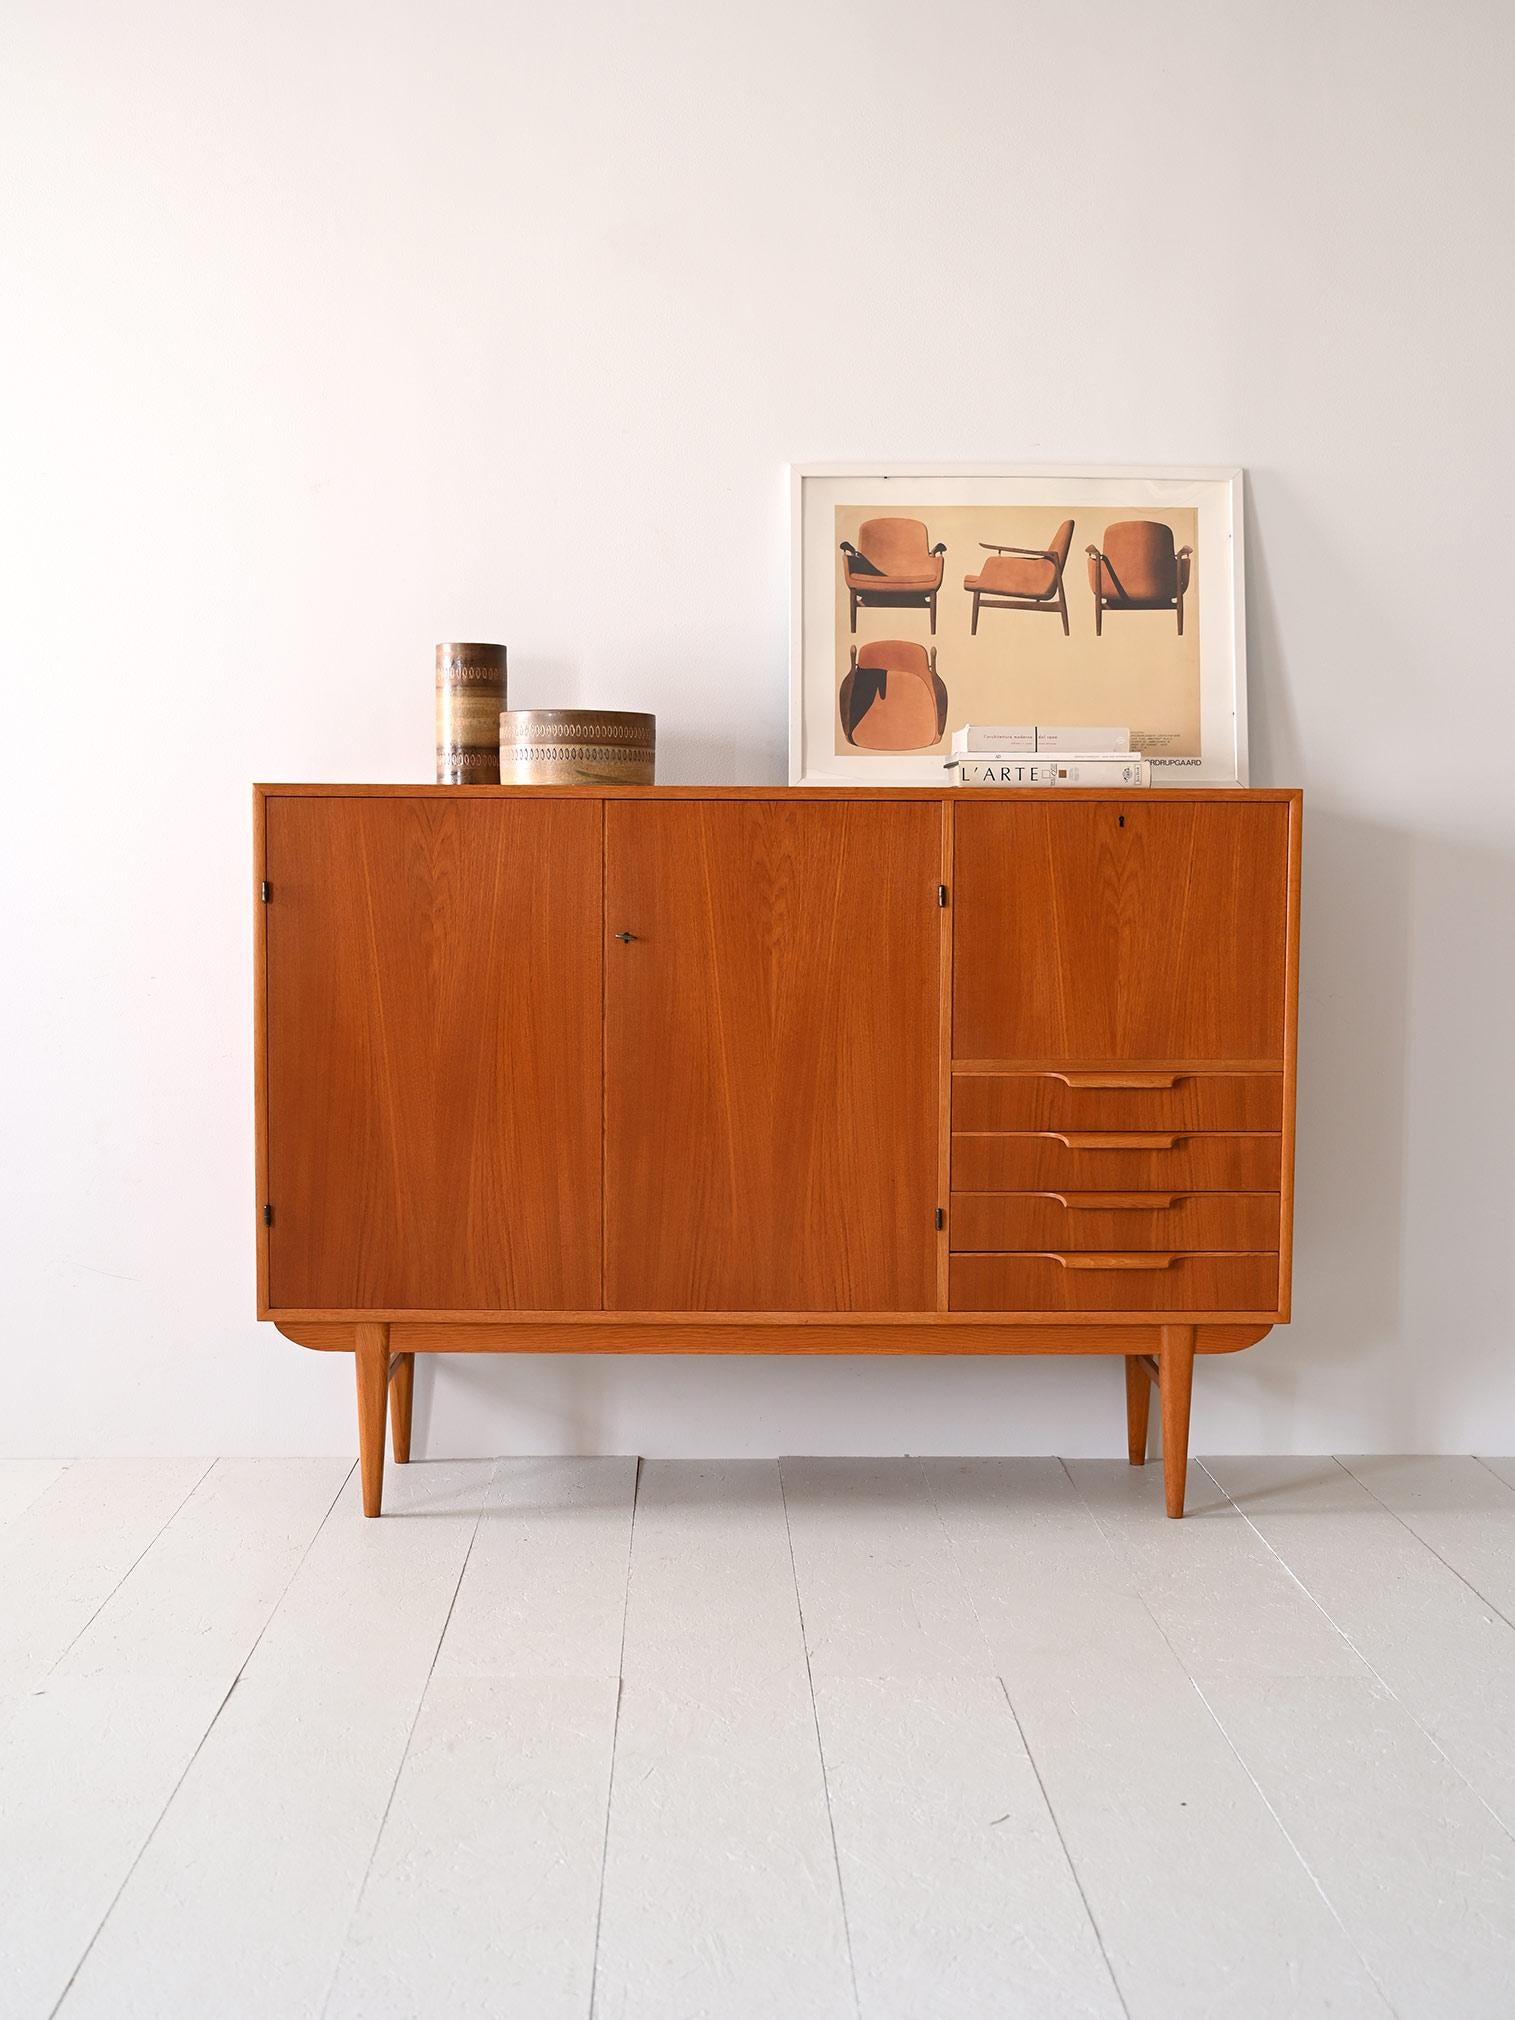 Scandinavian sideboard with doors and drawers.

Original 1960s cabinet consisting of a teak frame and oak legs and profiles. 
It features a storage compartment closed by two lockable hinged doors and on the right side are a flap, also lockable, and